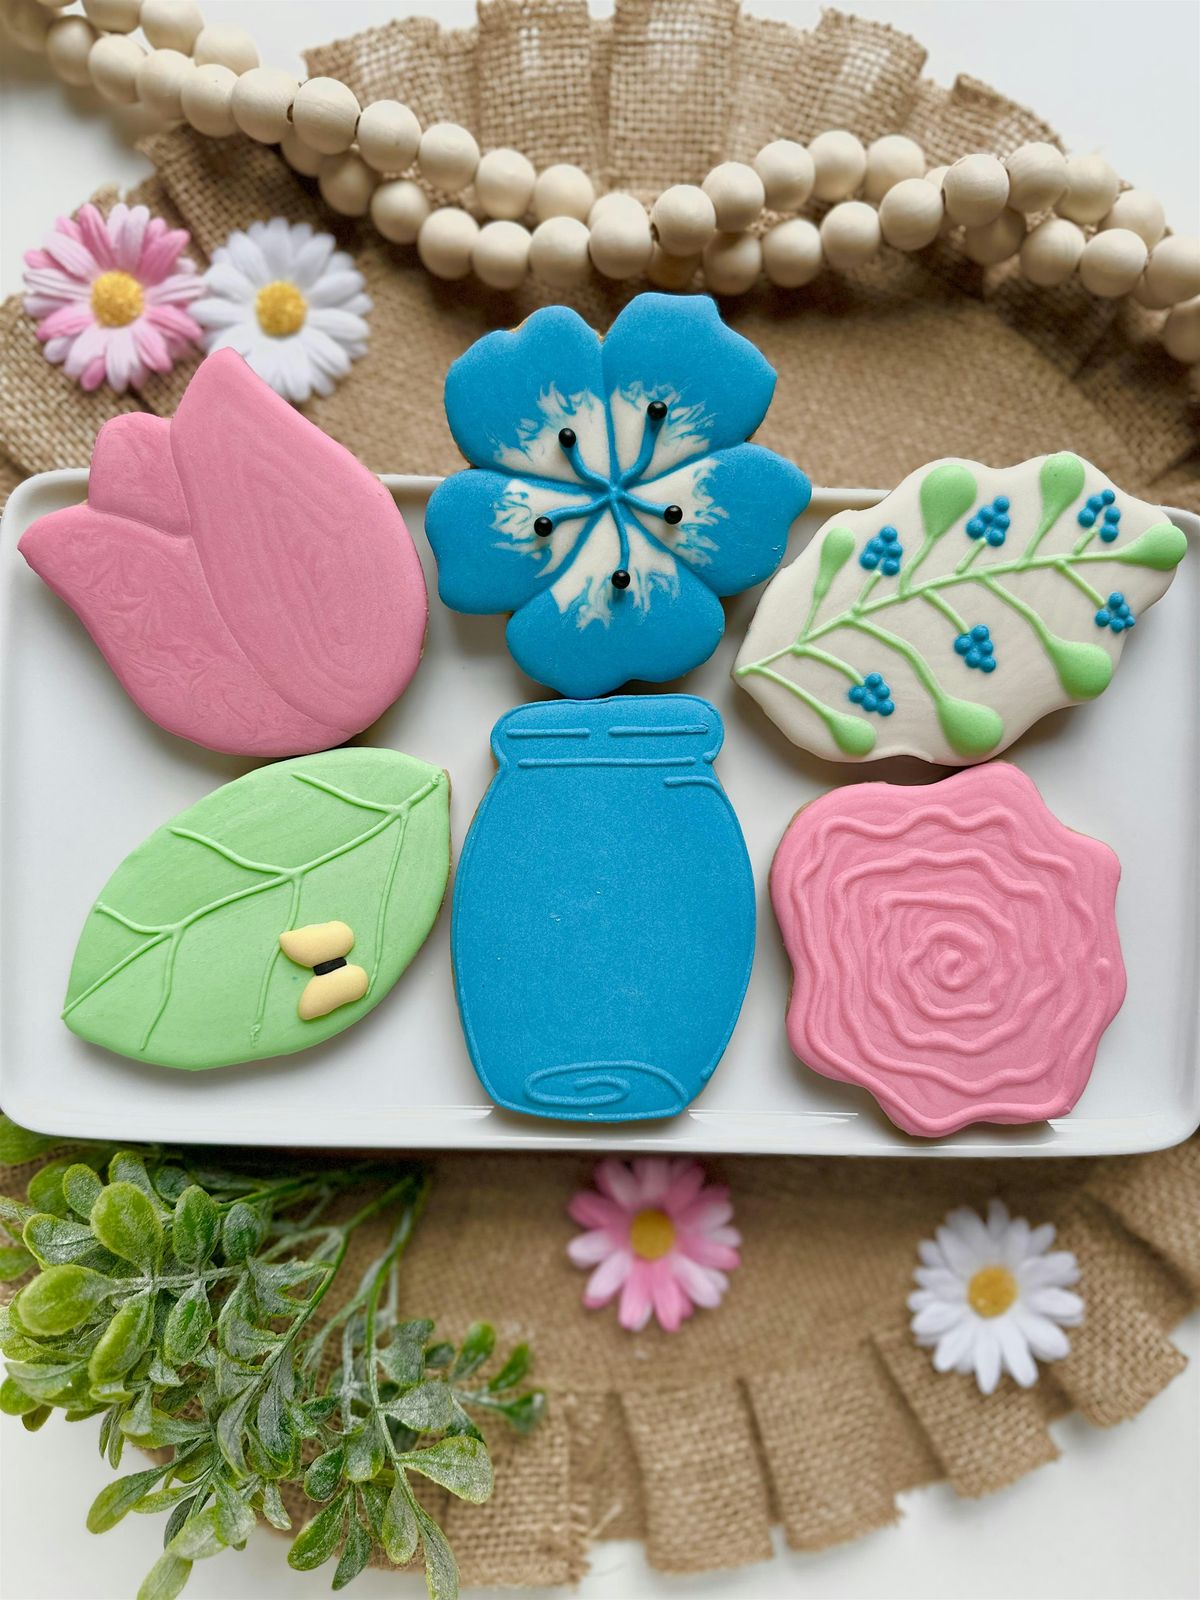 Bright Blooms Sugar Cookie Decorating Class